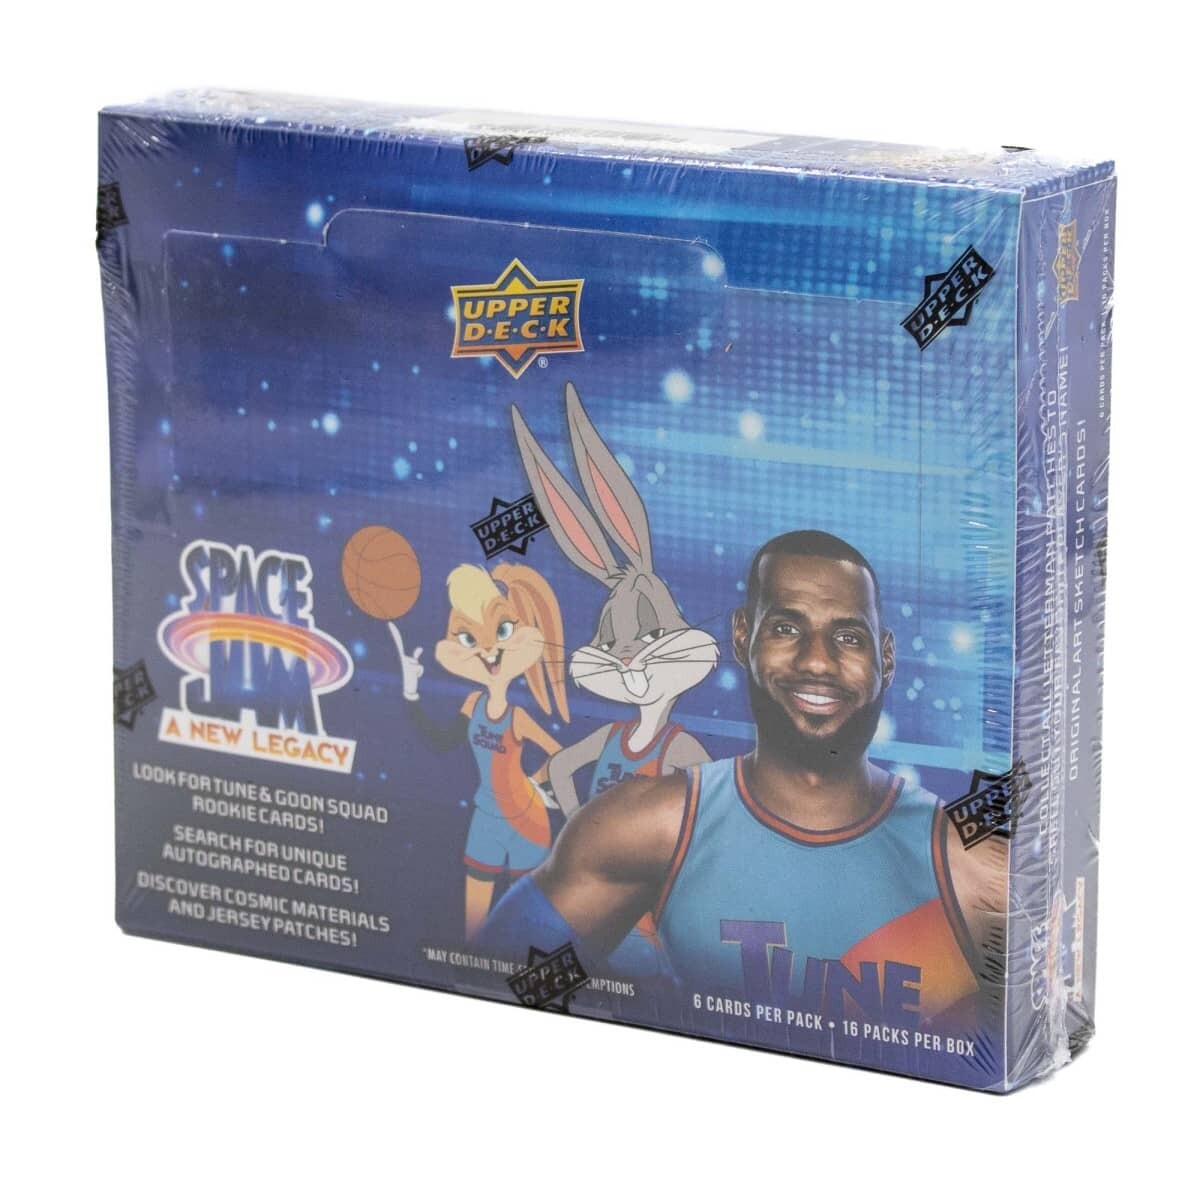 2021 Upper Deck - Space Jam : A New Legacy Hobby Box